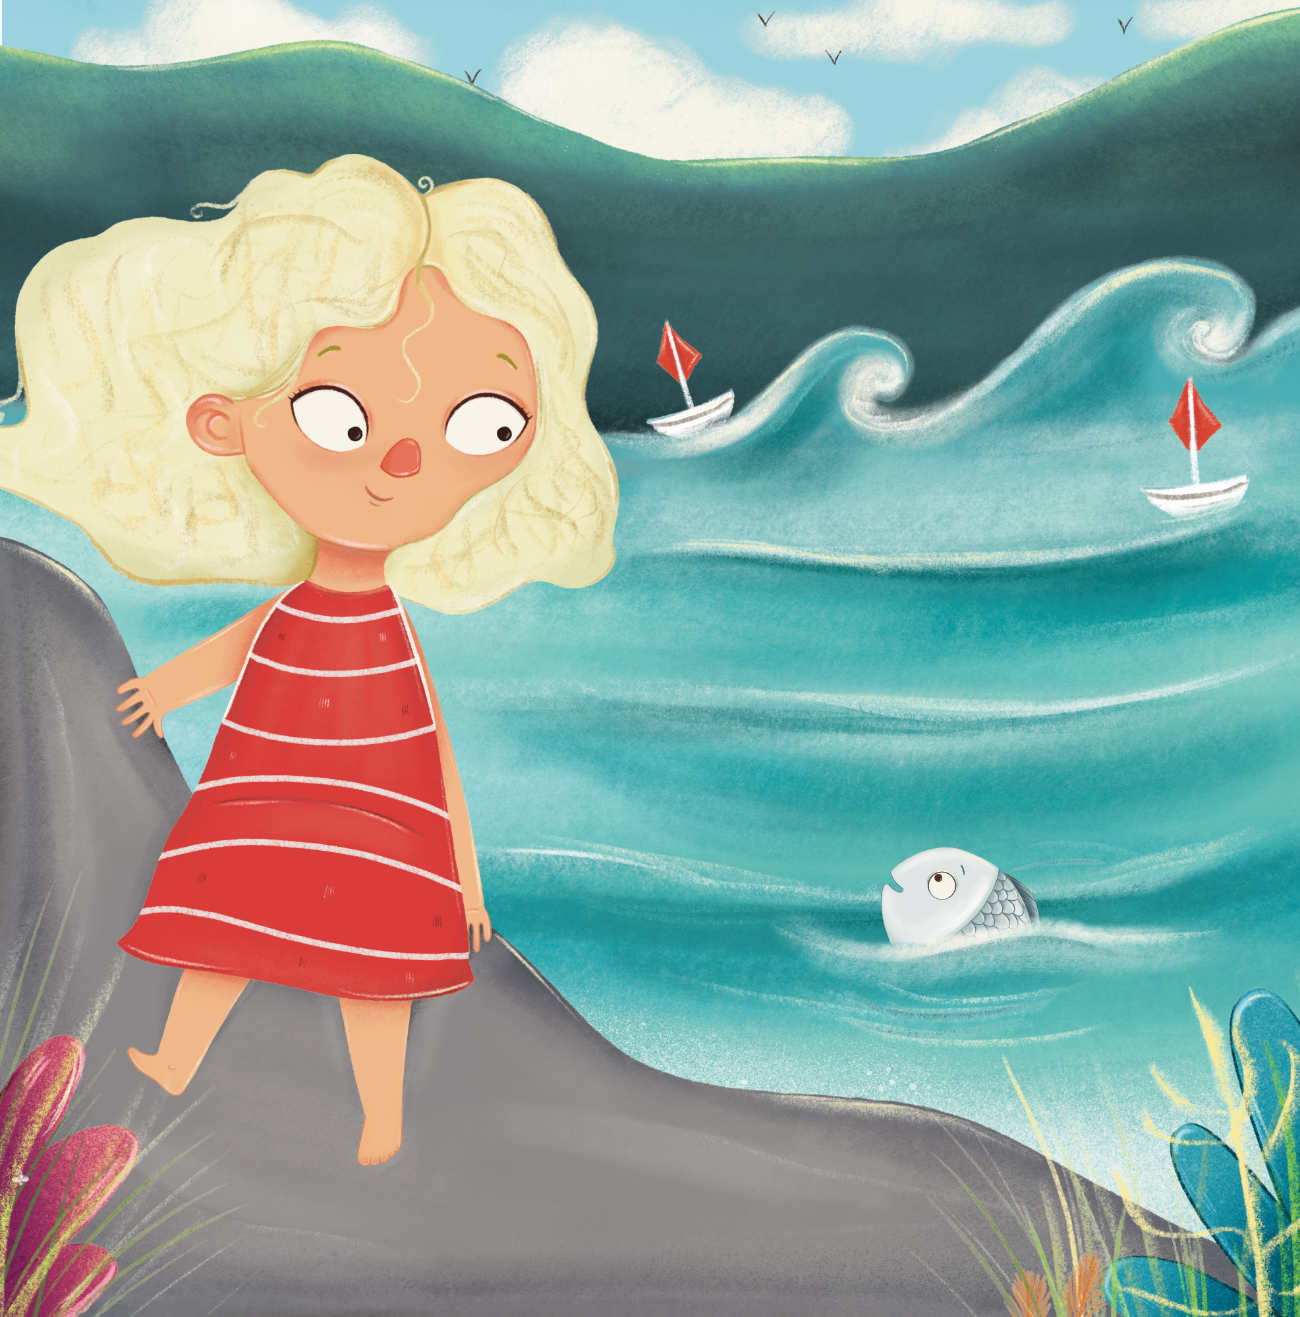 Bedtime Stories Lulah the Fish and the Whale by Jade Maitre short stories for kids page 24